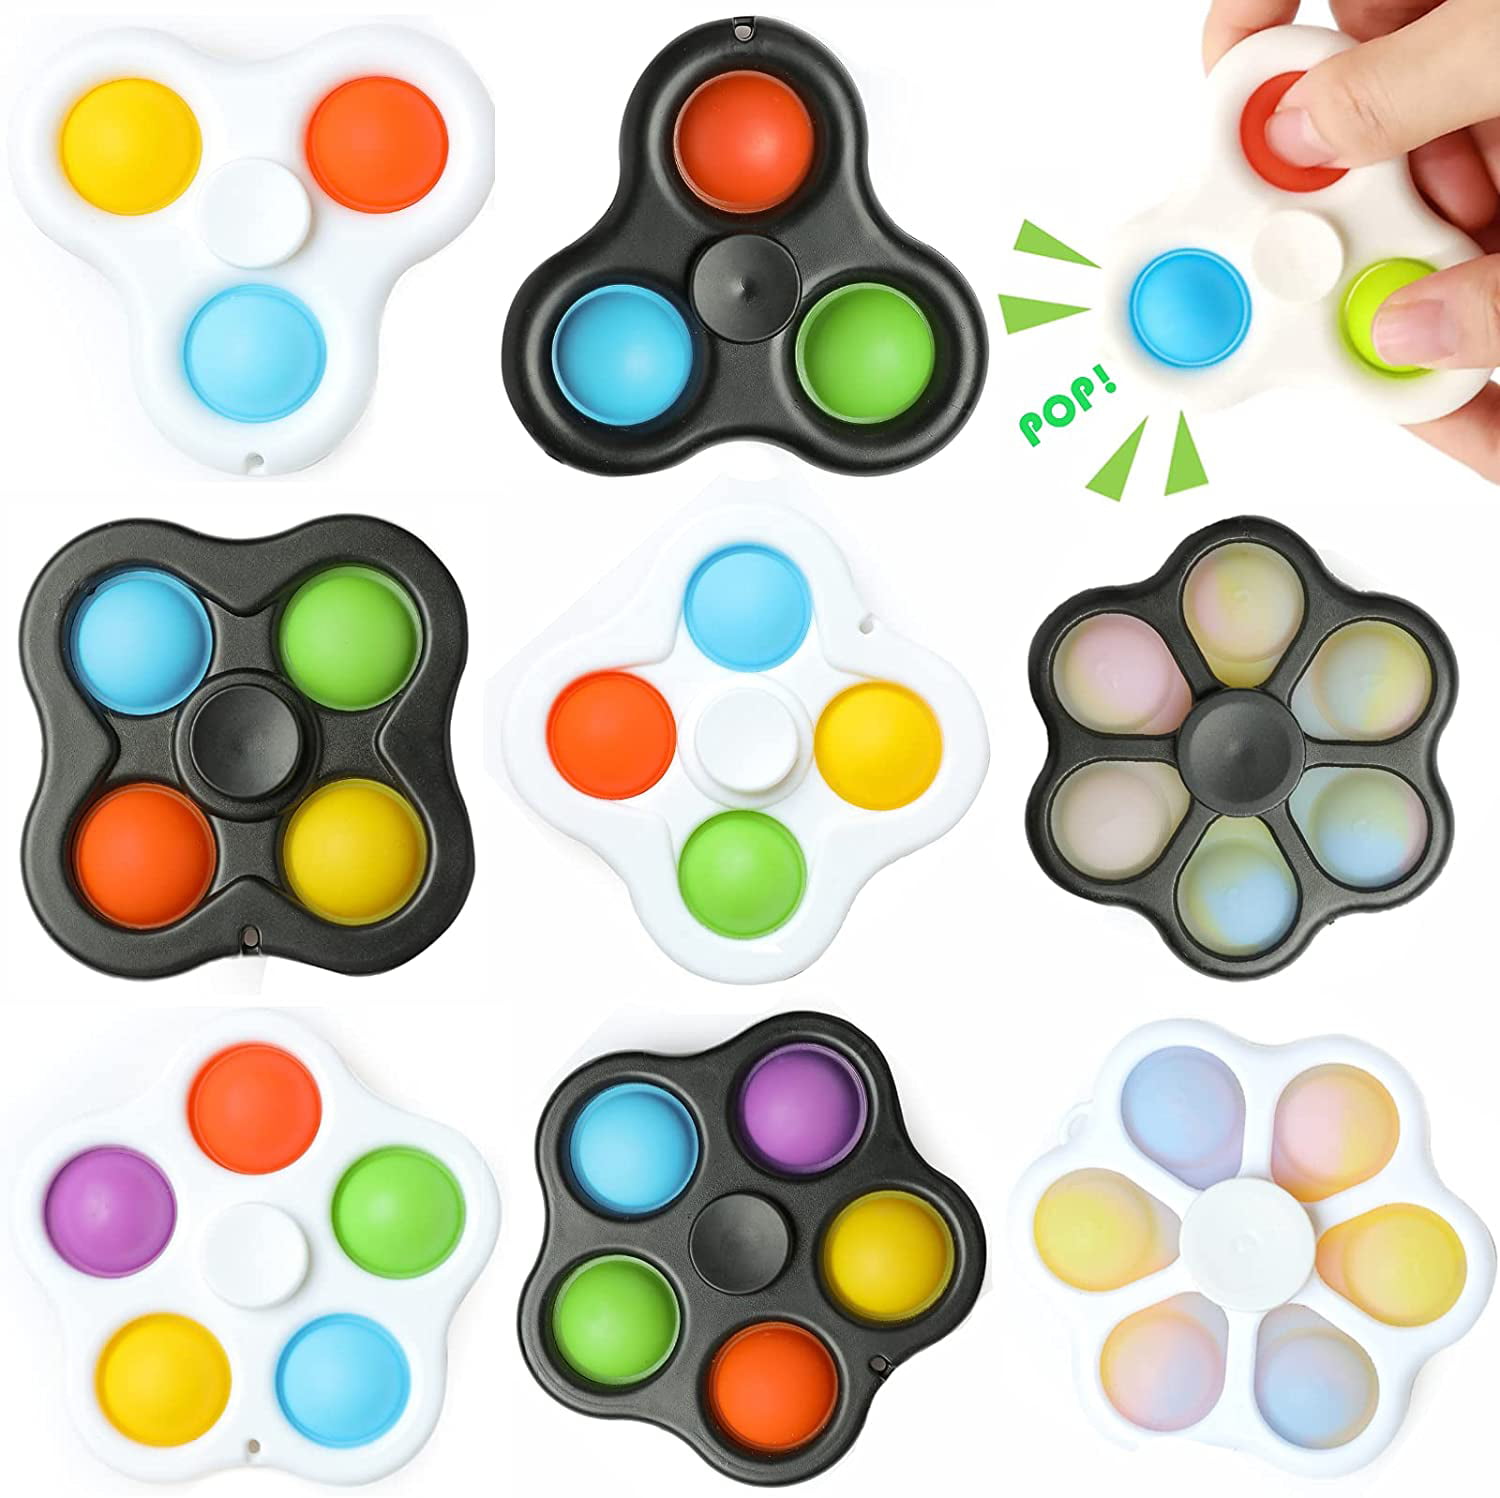 Simple Dimple Bubble Sensory Autism Kids Toy Stress Relief Fidget Spinner Game 